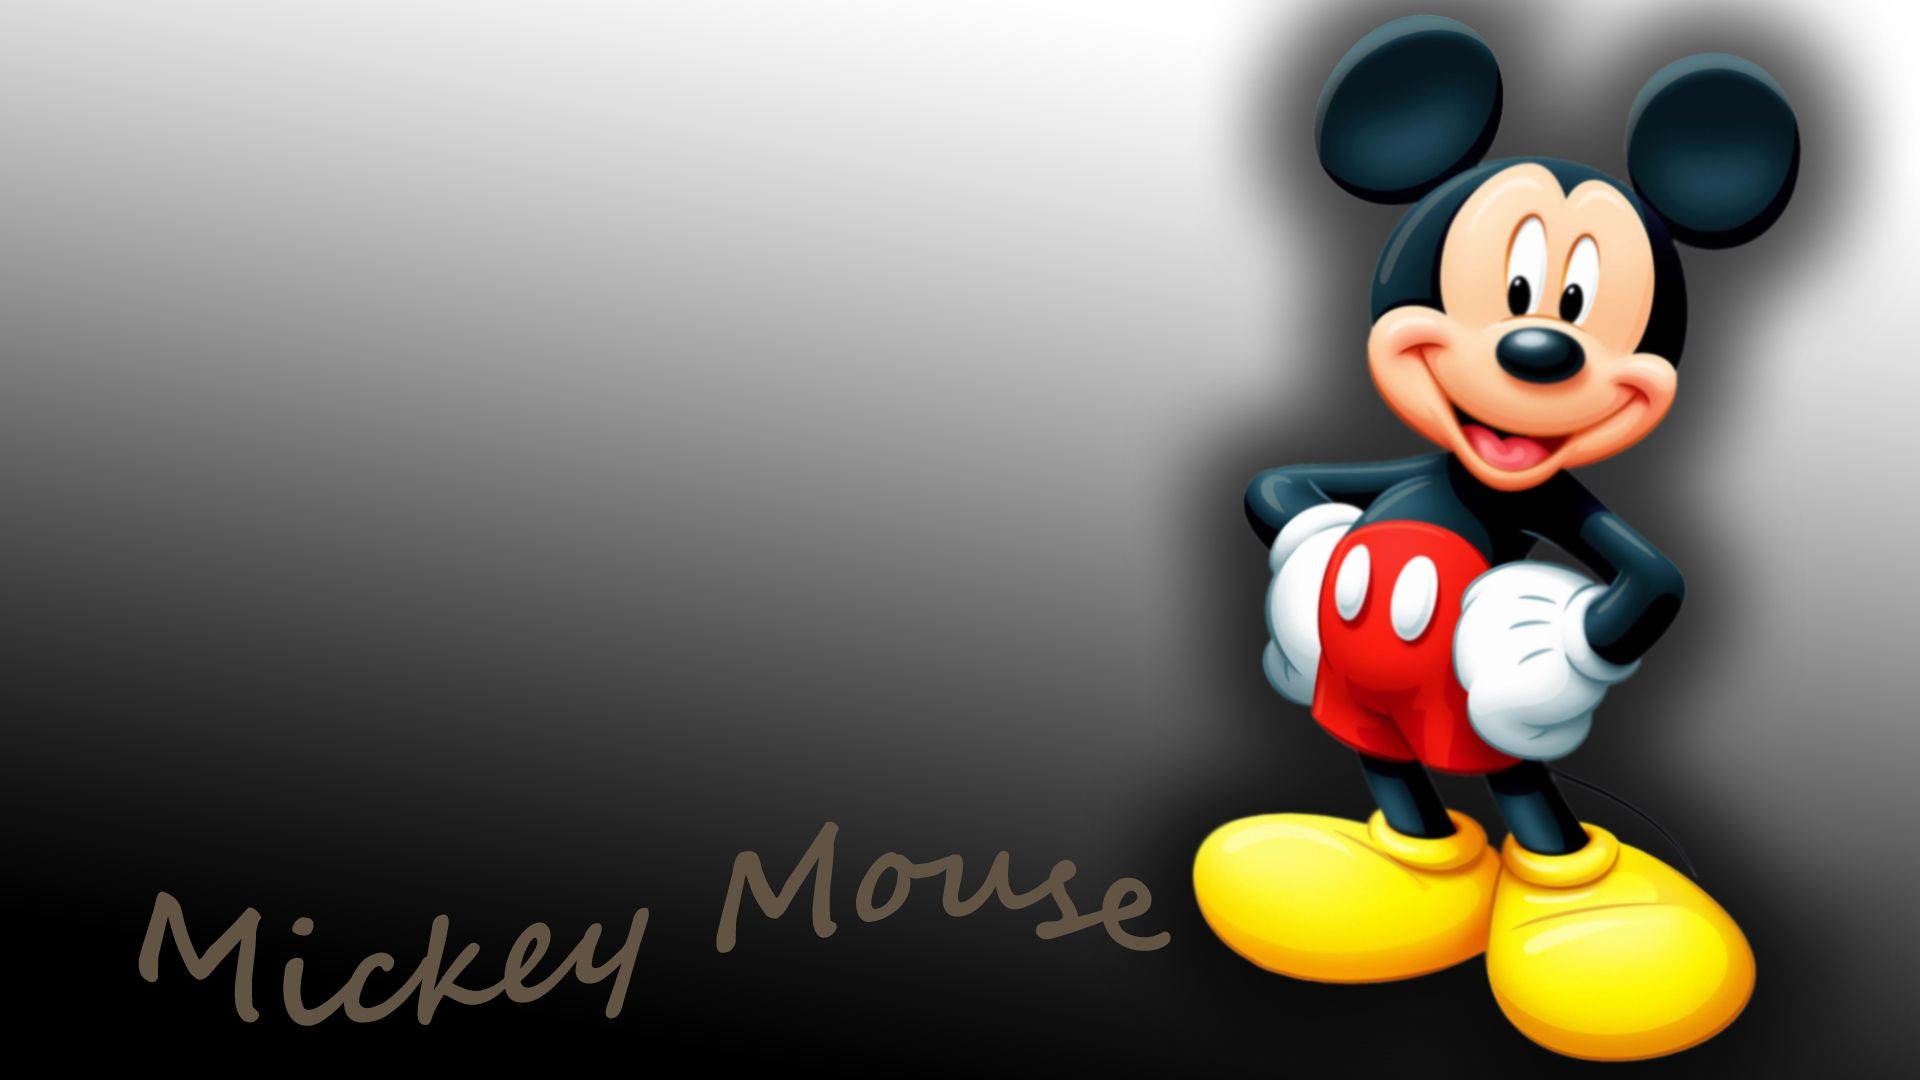 Download Mickey Mouse Wallpaper HD Picture - Download Page